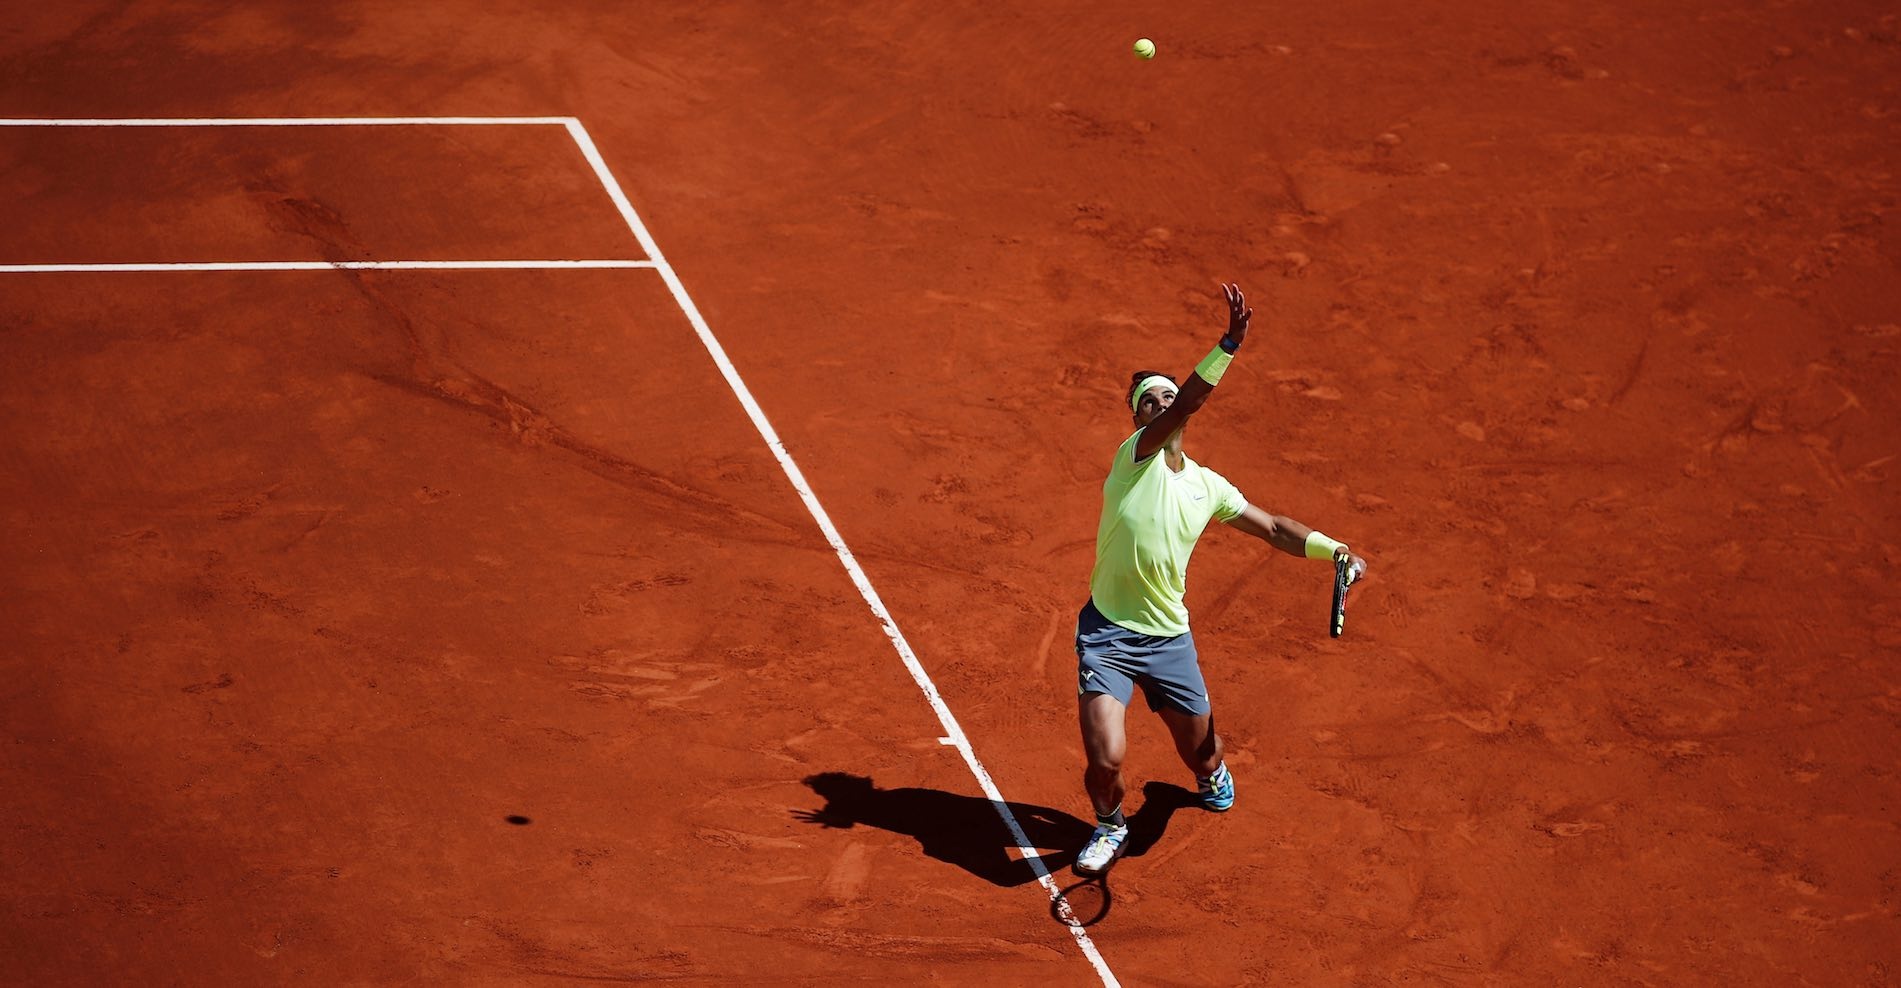 He goes behind the scenes to discover Roland Garros and its secrets.